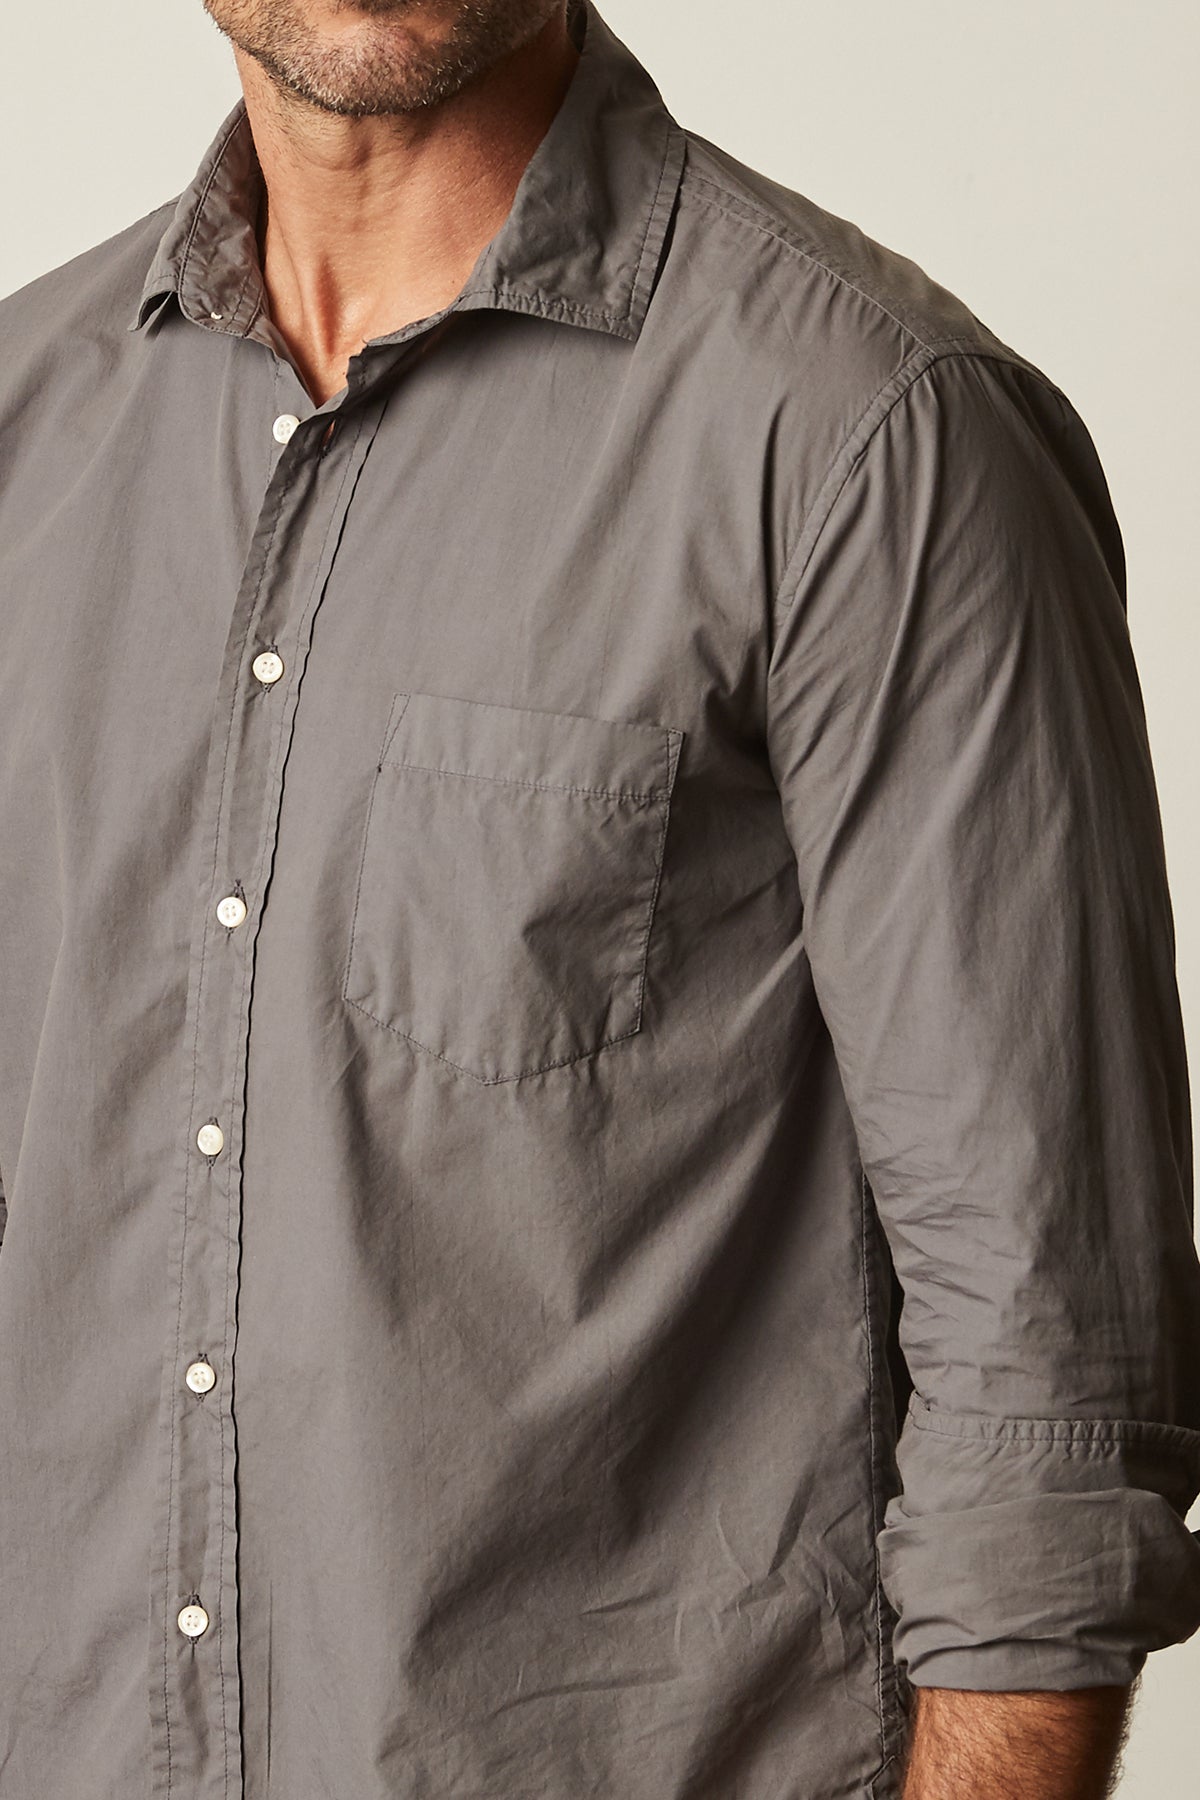   Brooks button up woven shirt in carbon front detail 